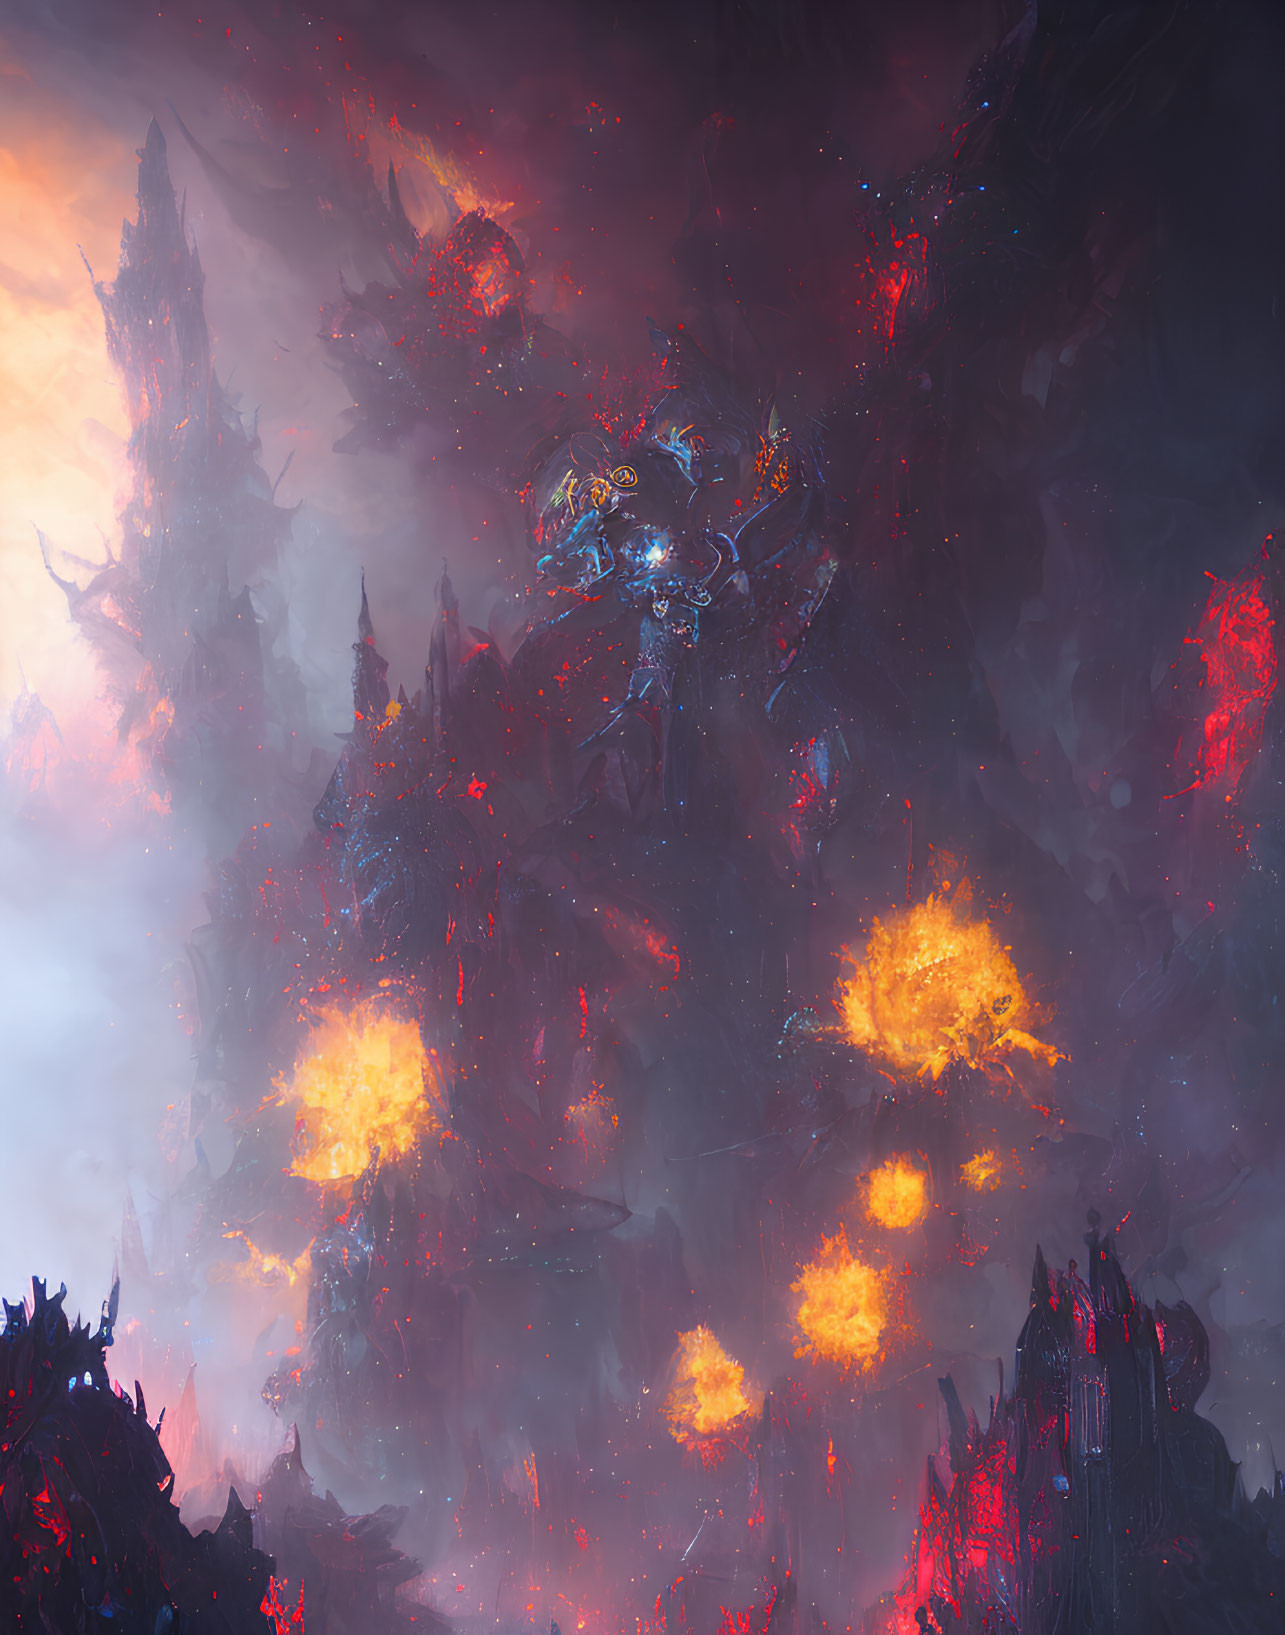 Fiery landscape with lava, spires, and mysterious figure in blue light